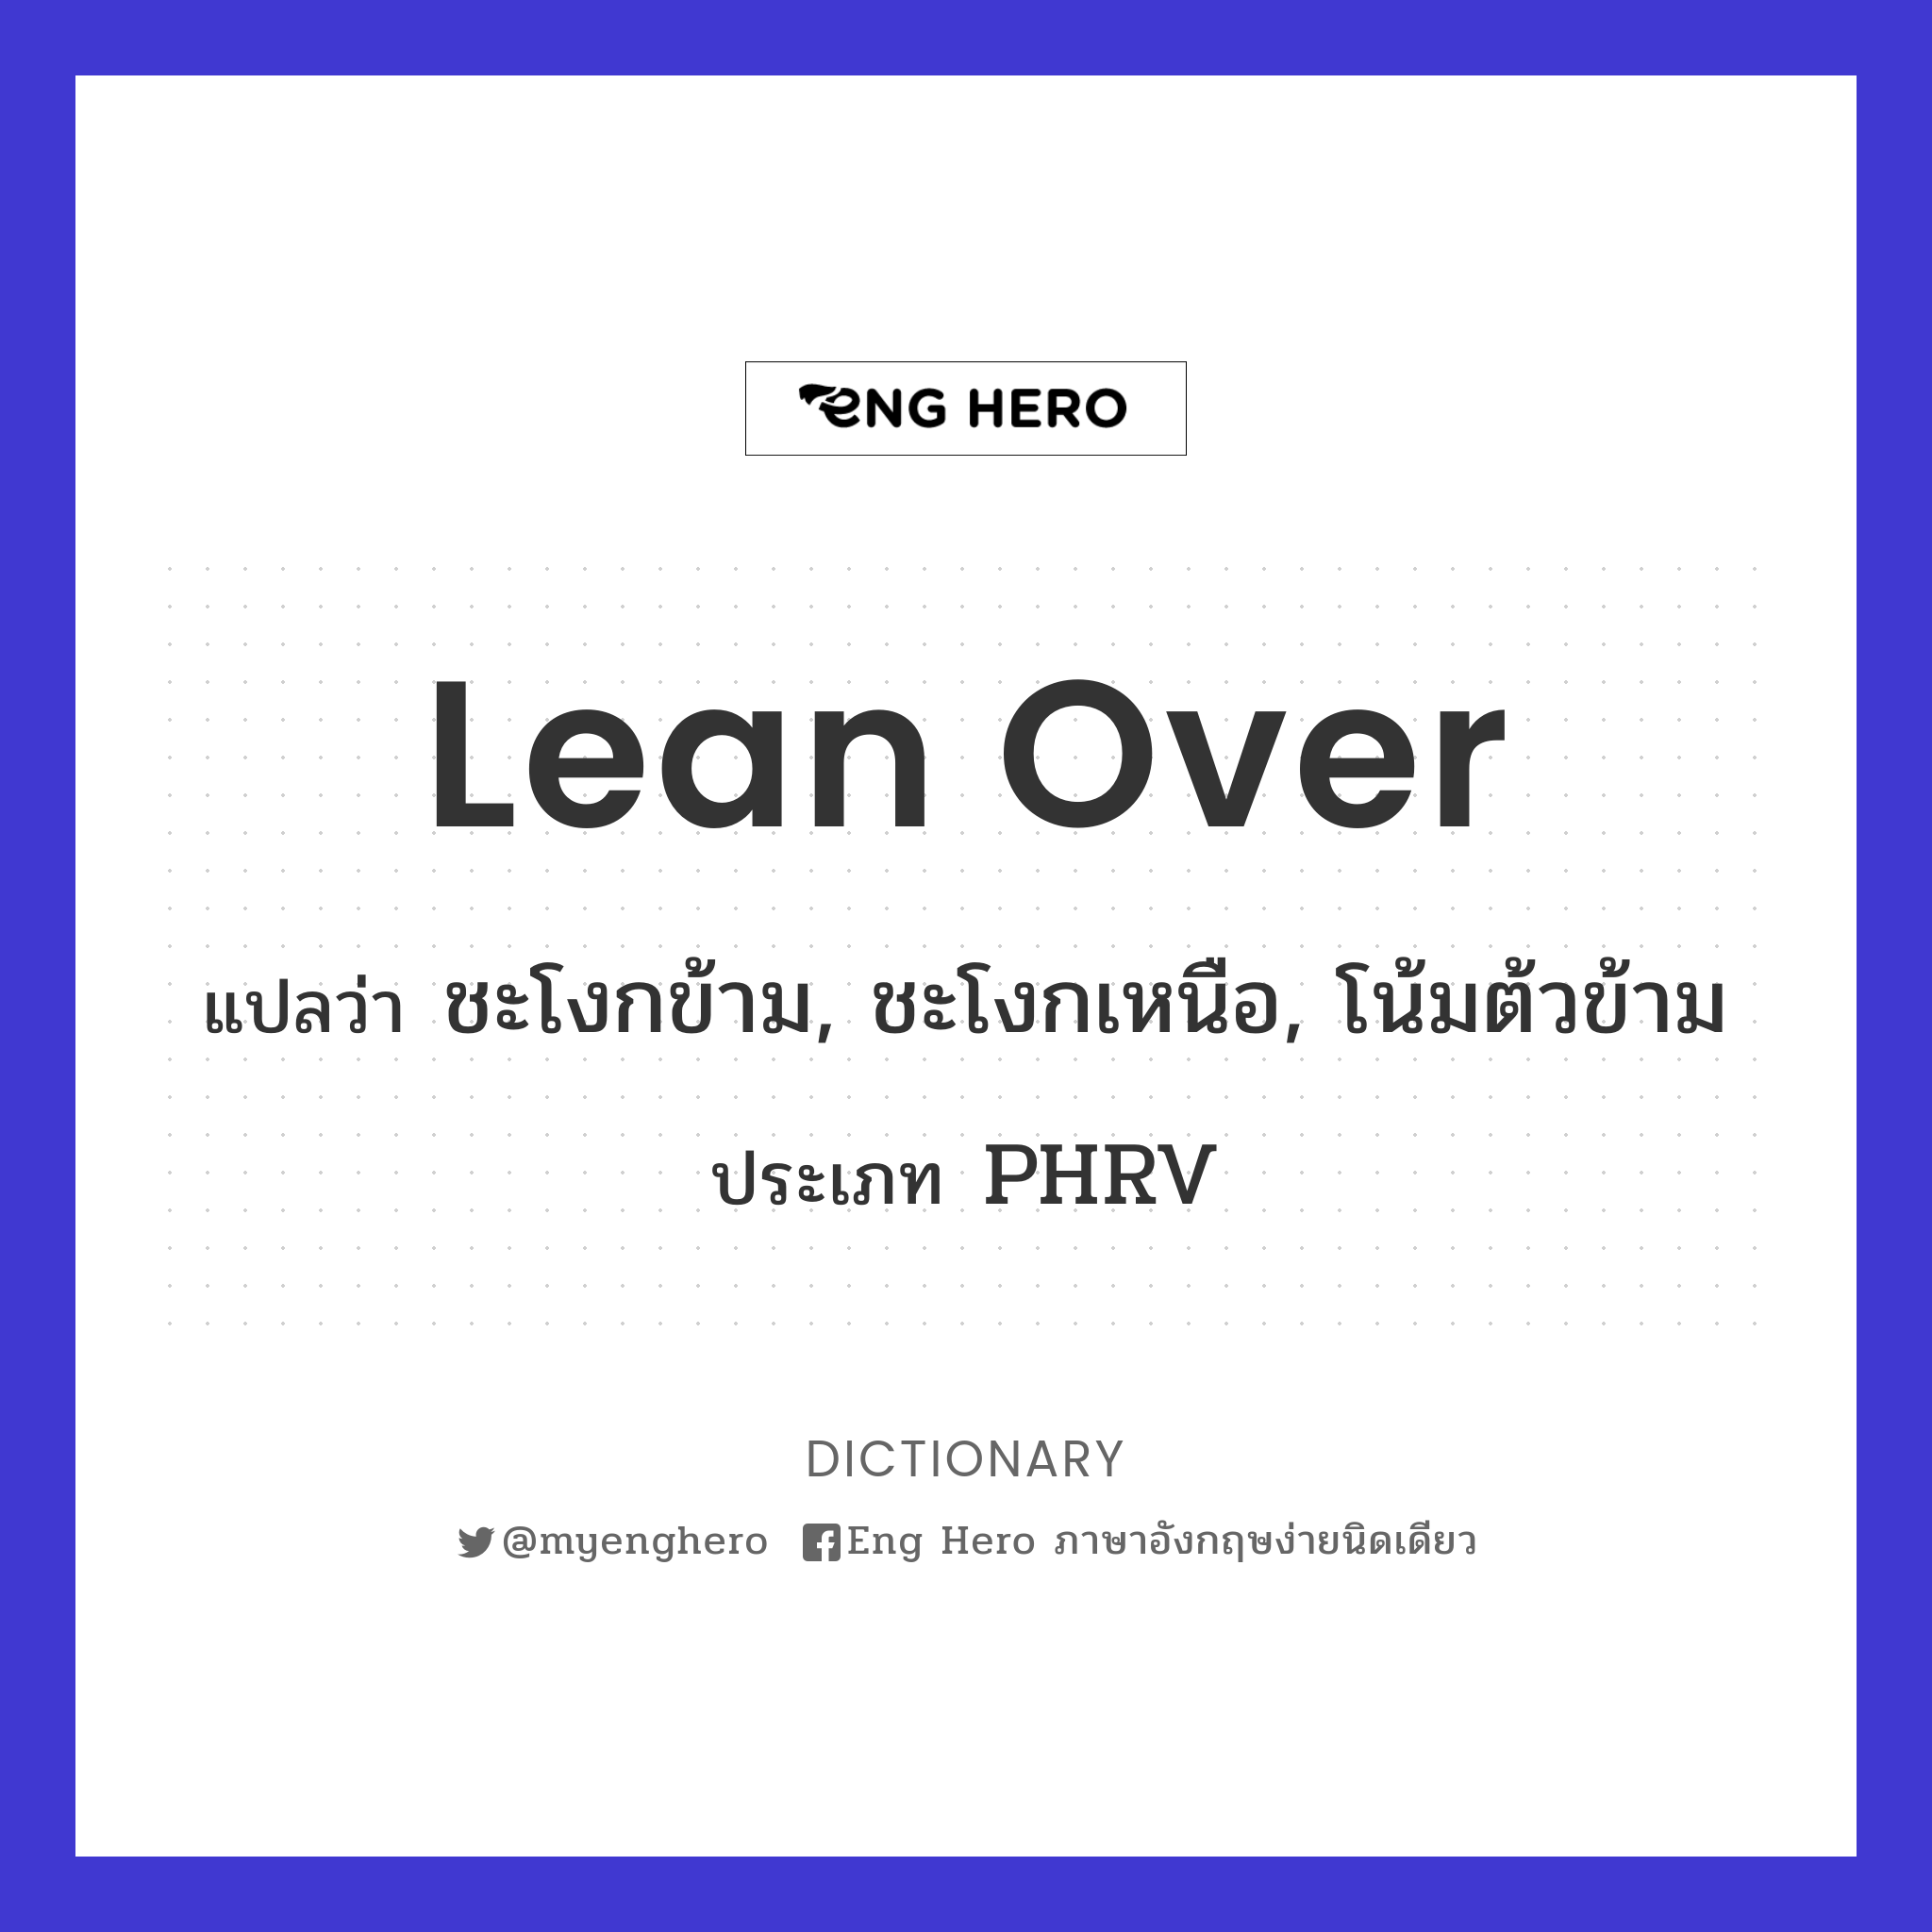 lean over